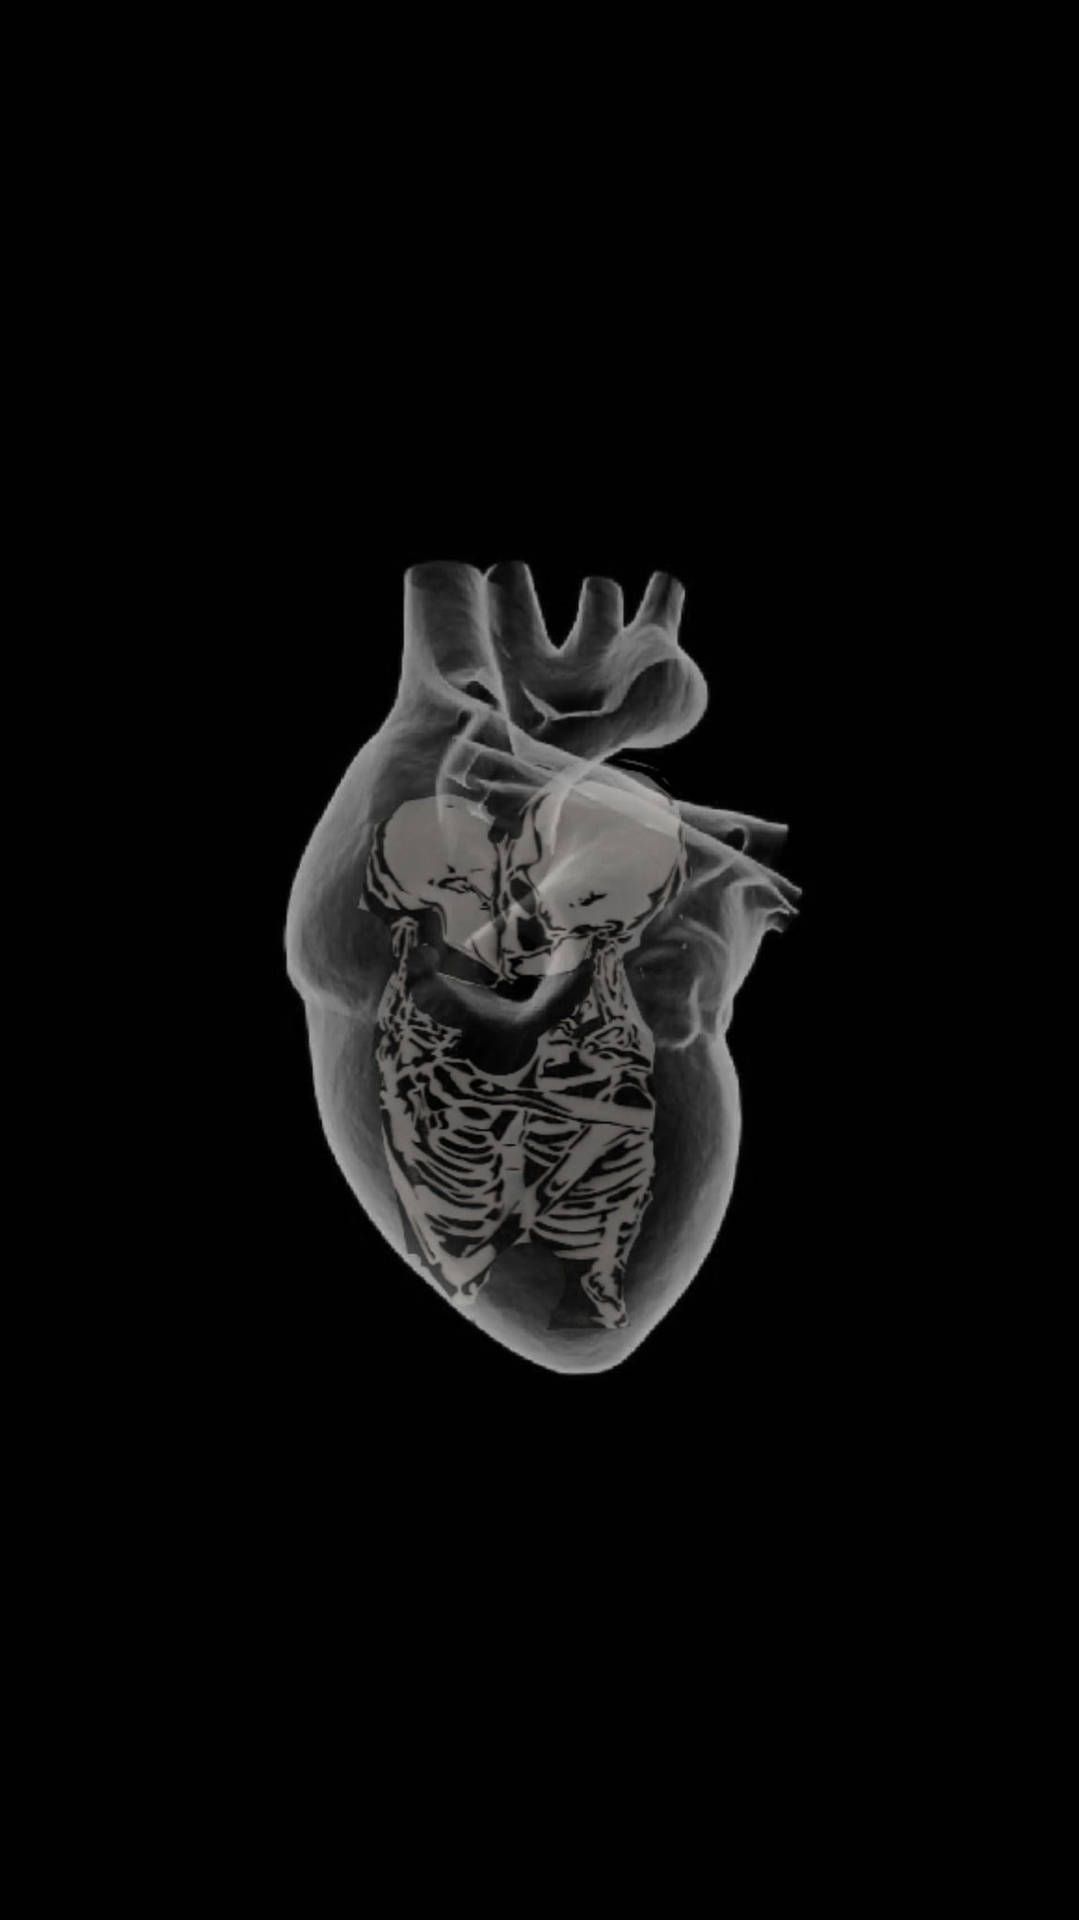 A black and white image of a human heart. - Skeleton